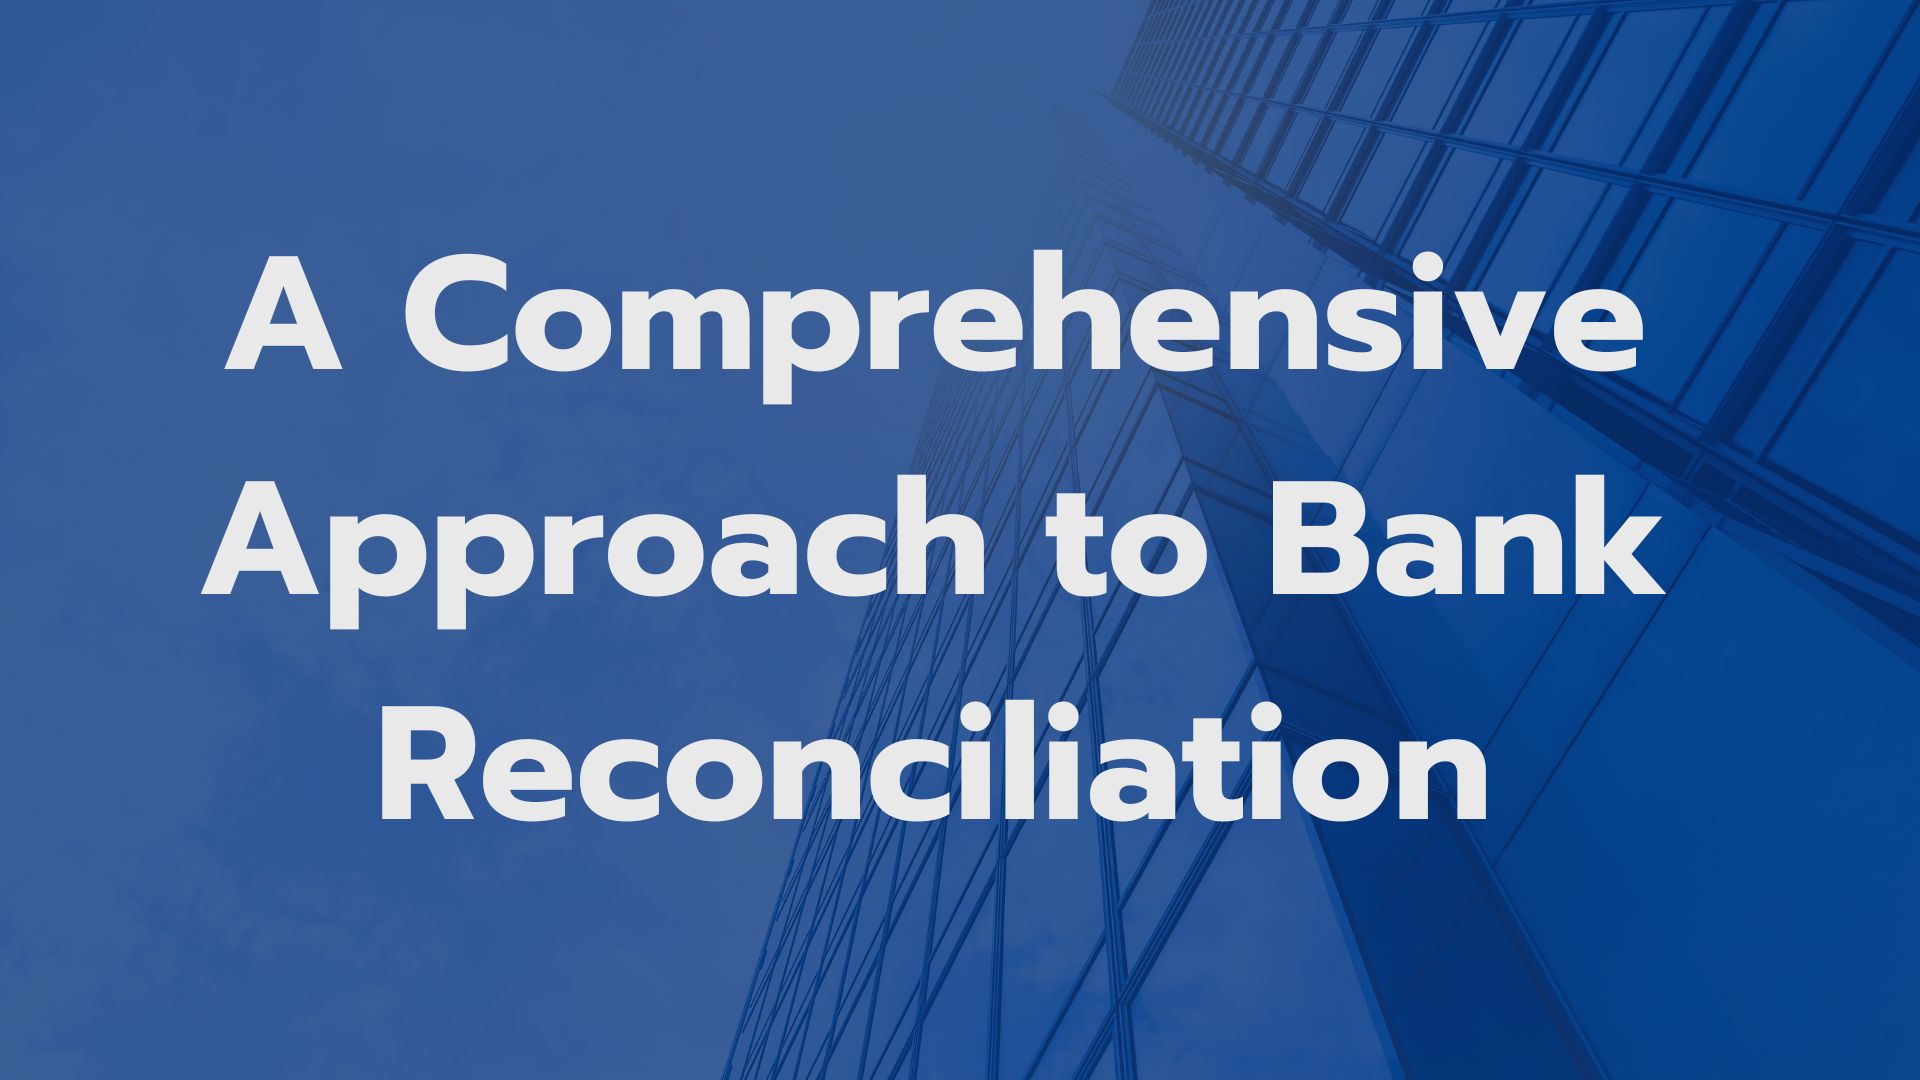 A Comprehensive Approach to Bank Reconciliation